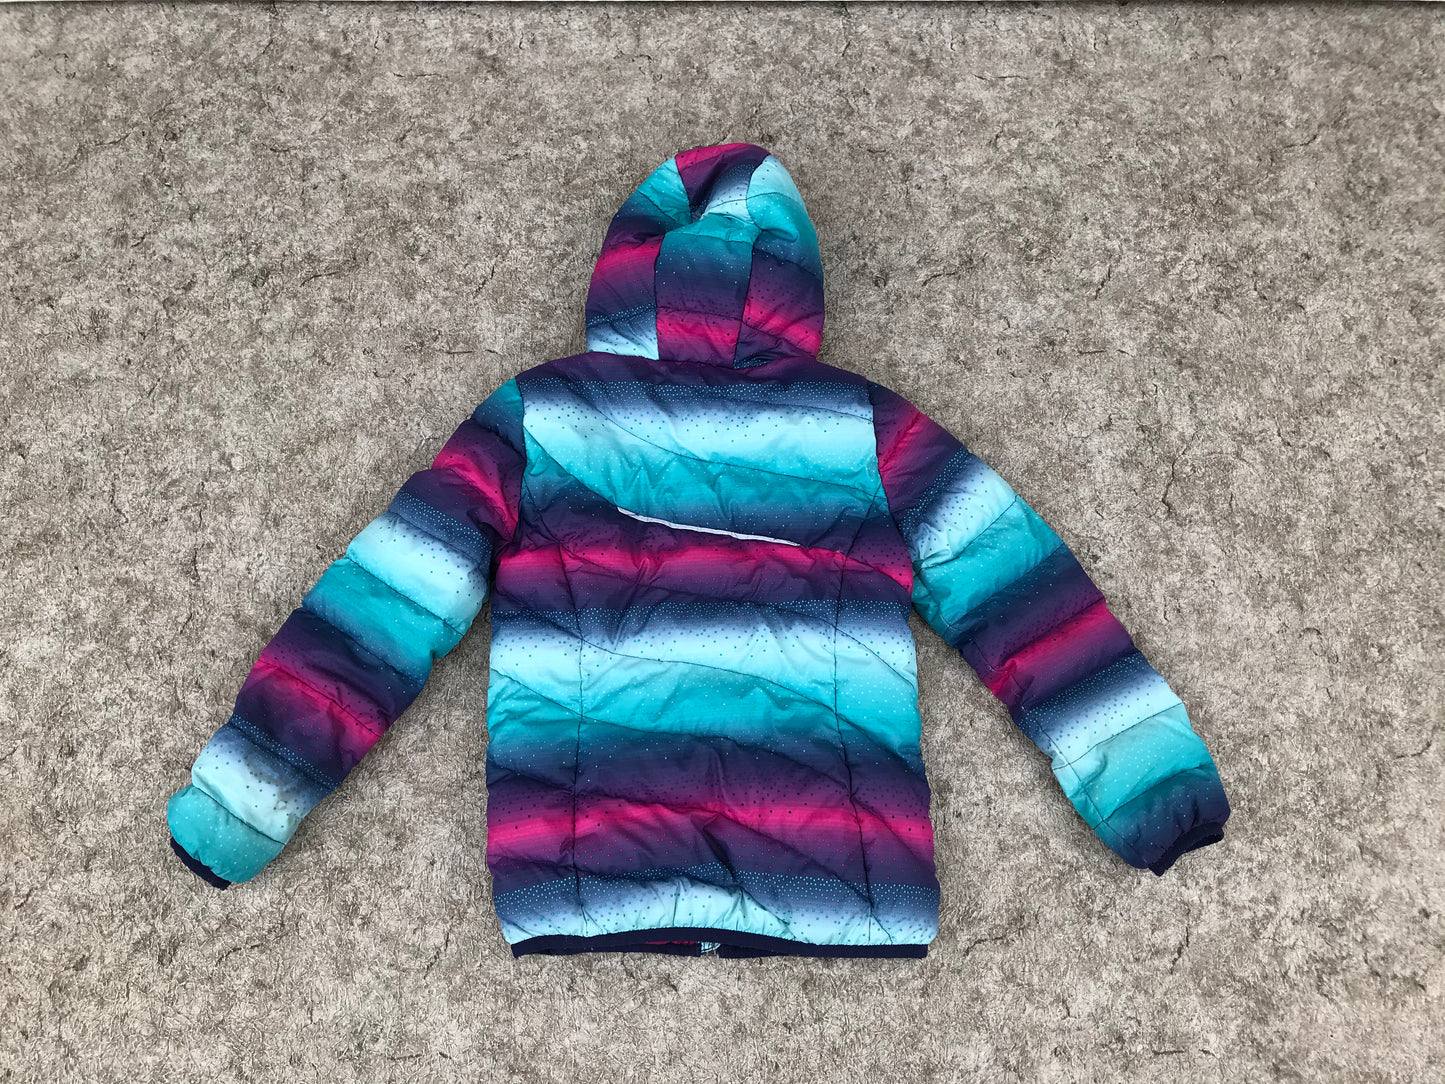 Light Coat Child Size 7-8 Paradox Teal Pinm Purple  Puffer Packable